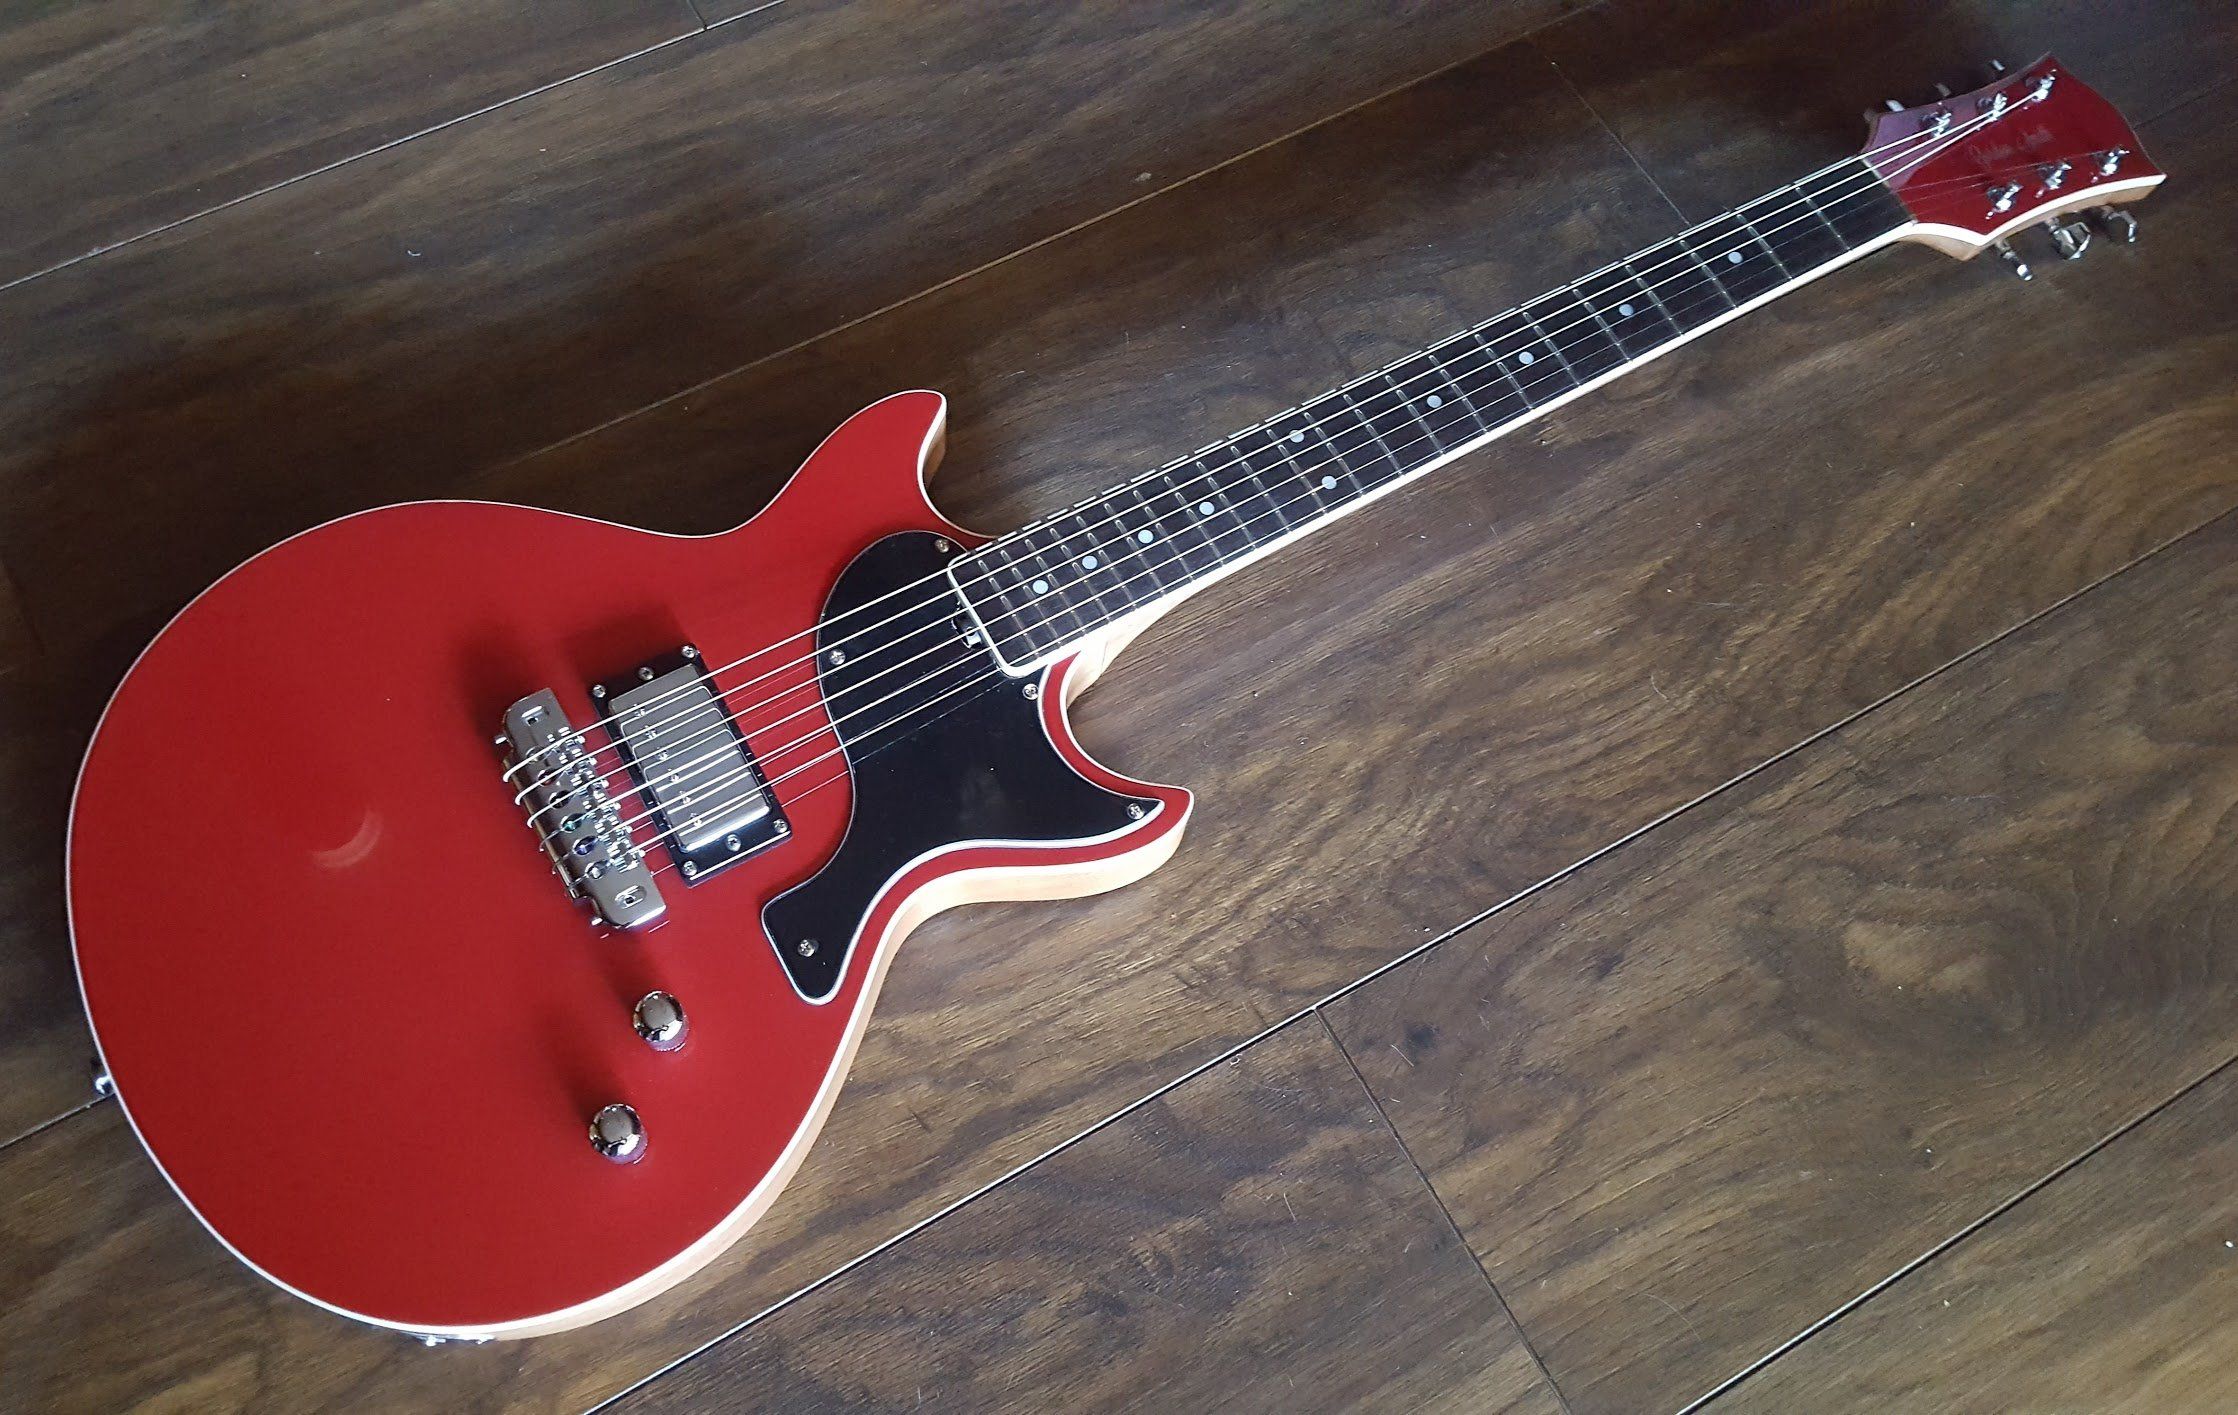 Gordon Smith GS1000 Red, Electric Guitar for sale at Richards Guitars.